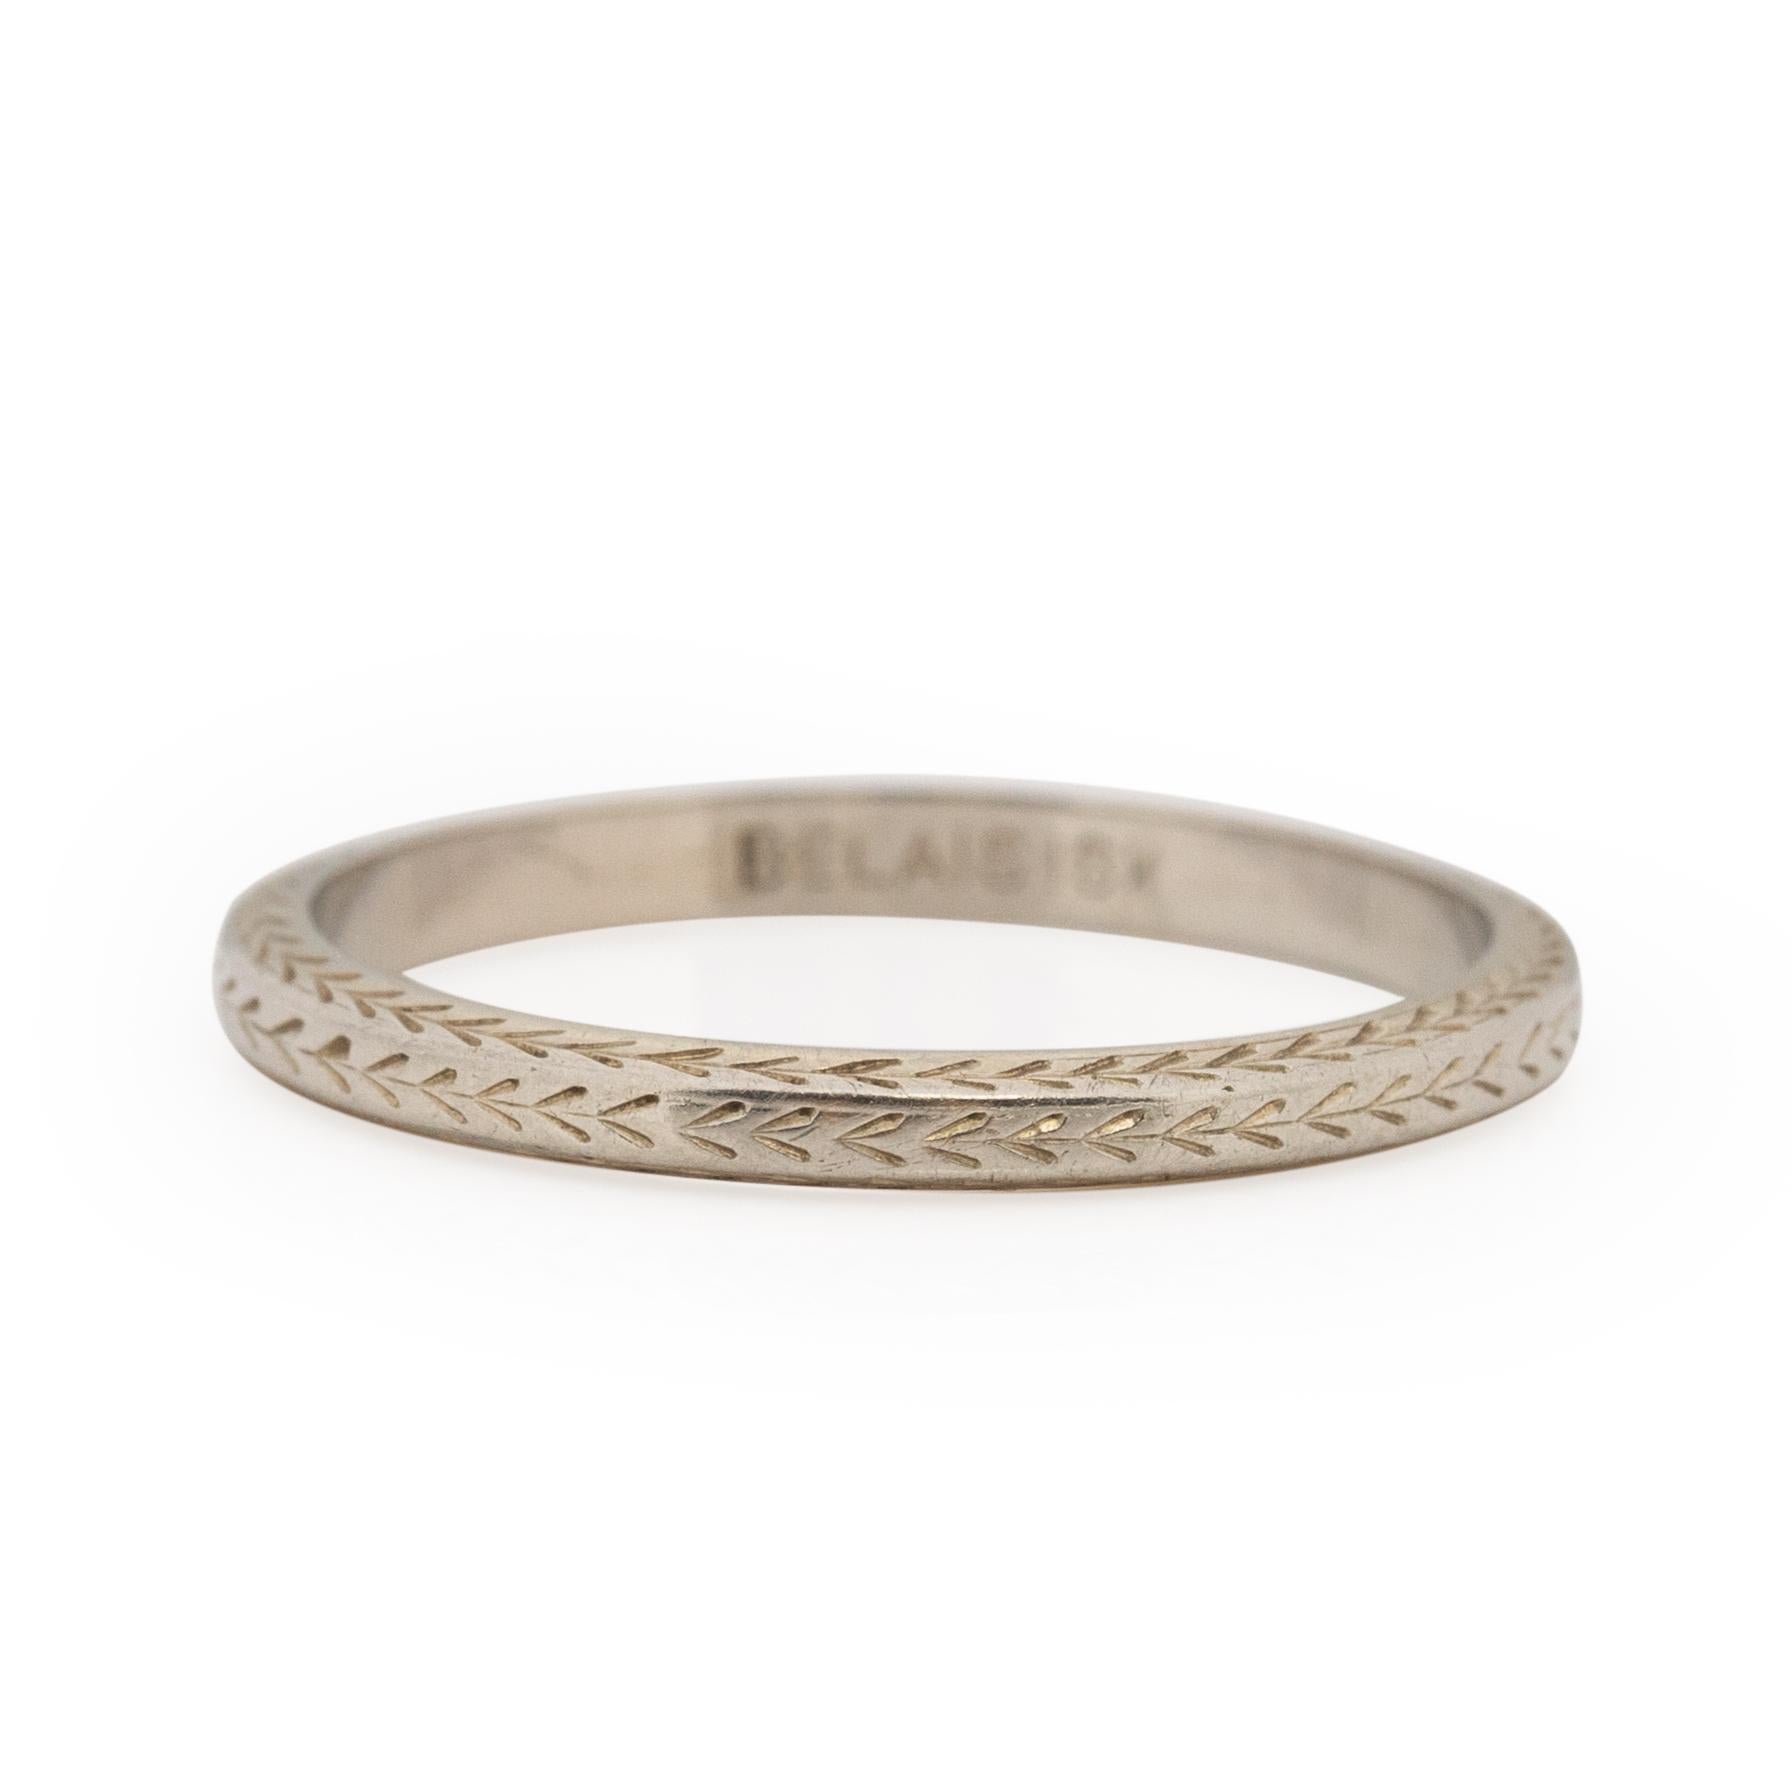 This signed Belais Bros beauty is a classic Belais design. Popular in the 1920's this 18K white gold band has three sides that are carved with a chevron design. The delicate details are visible at every turn. The repeating chevron pattern is simple,